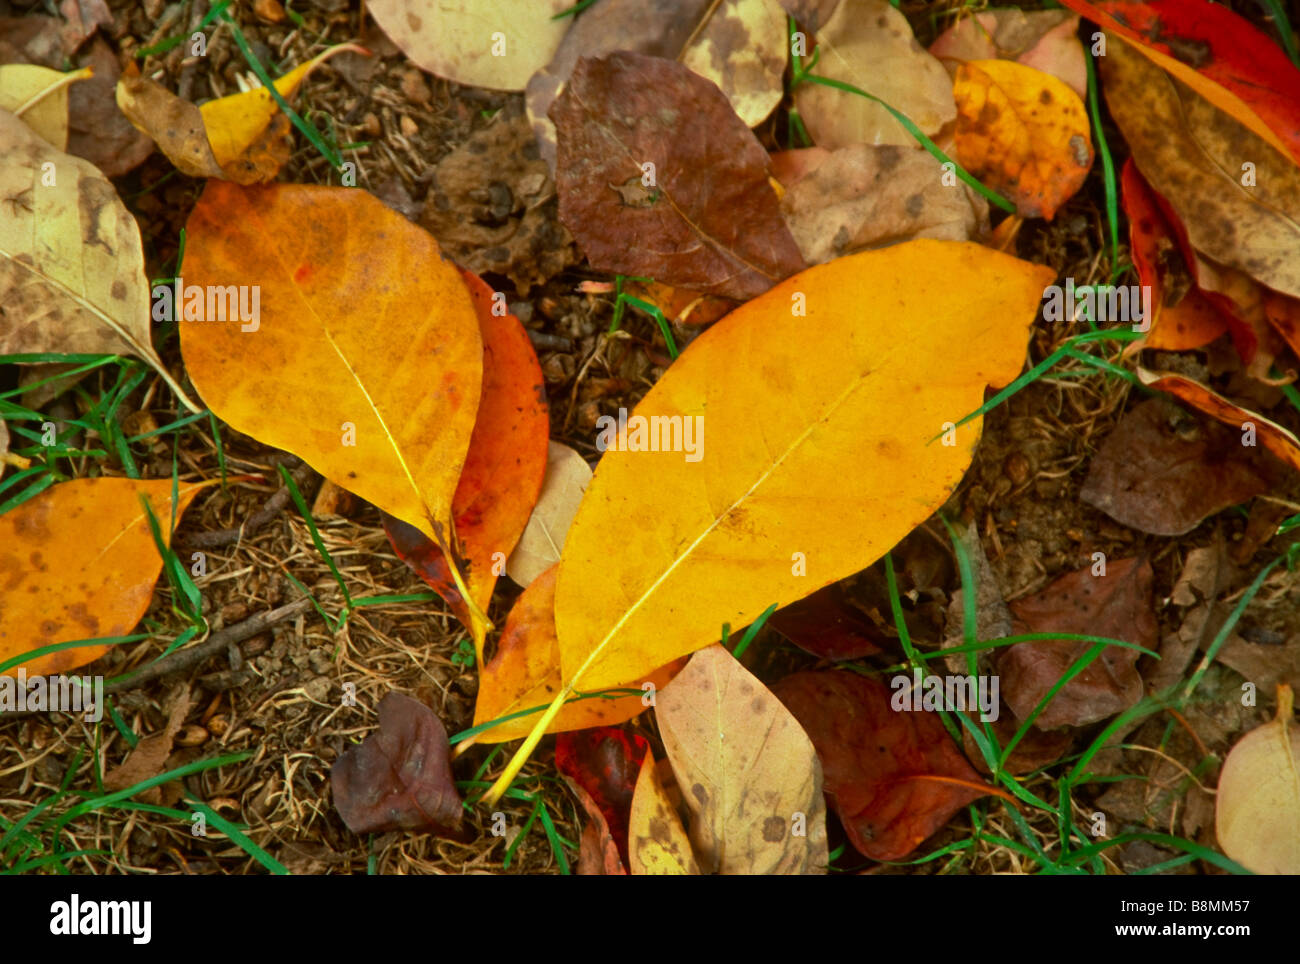 The fallen autumn leaves of Nyssa sylvatica (sour gum or black tupelo) a native Nroth American tree noted for its fall color. Stock Photo